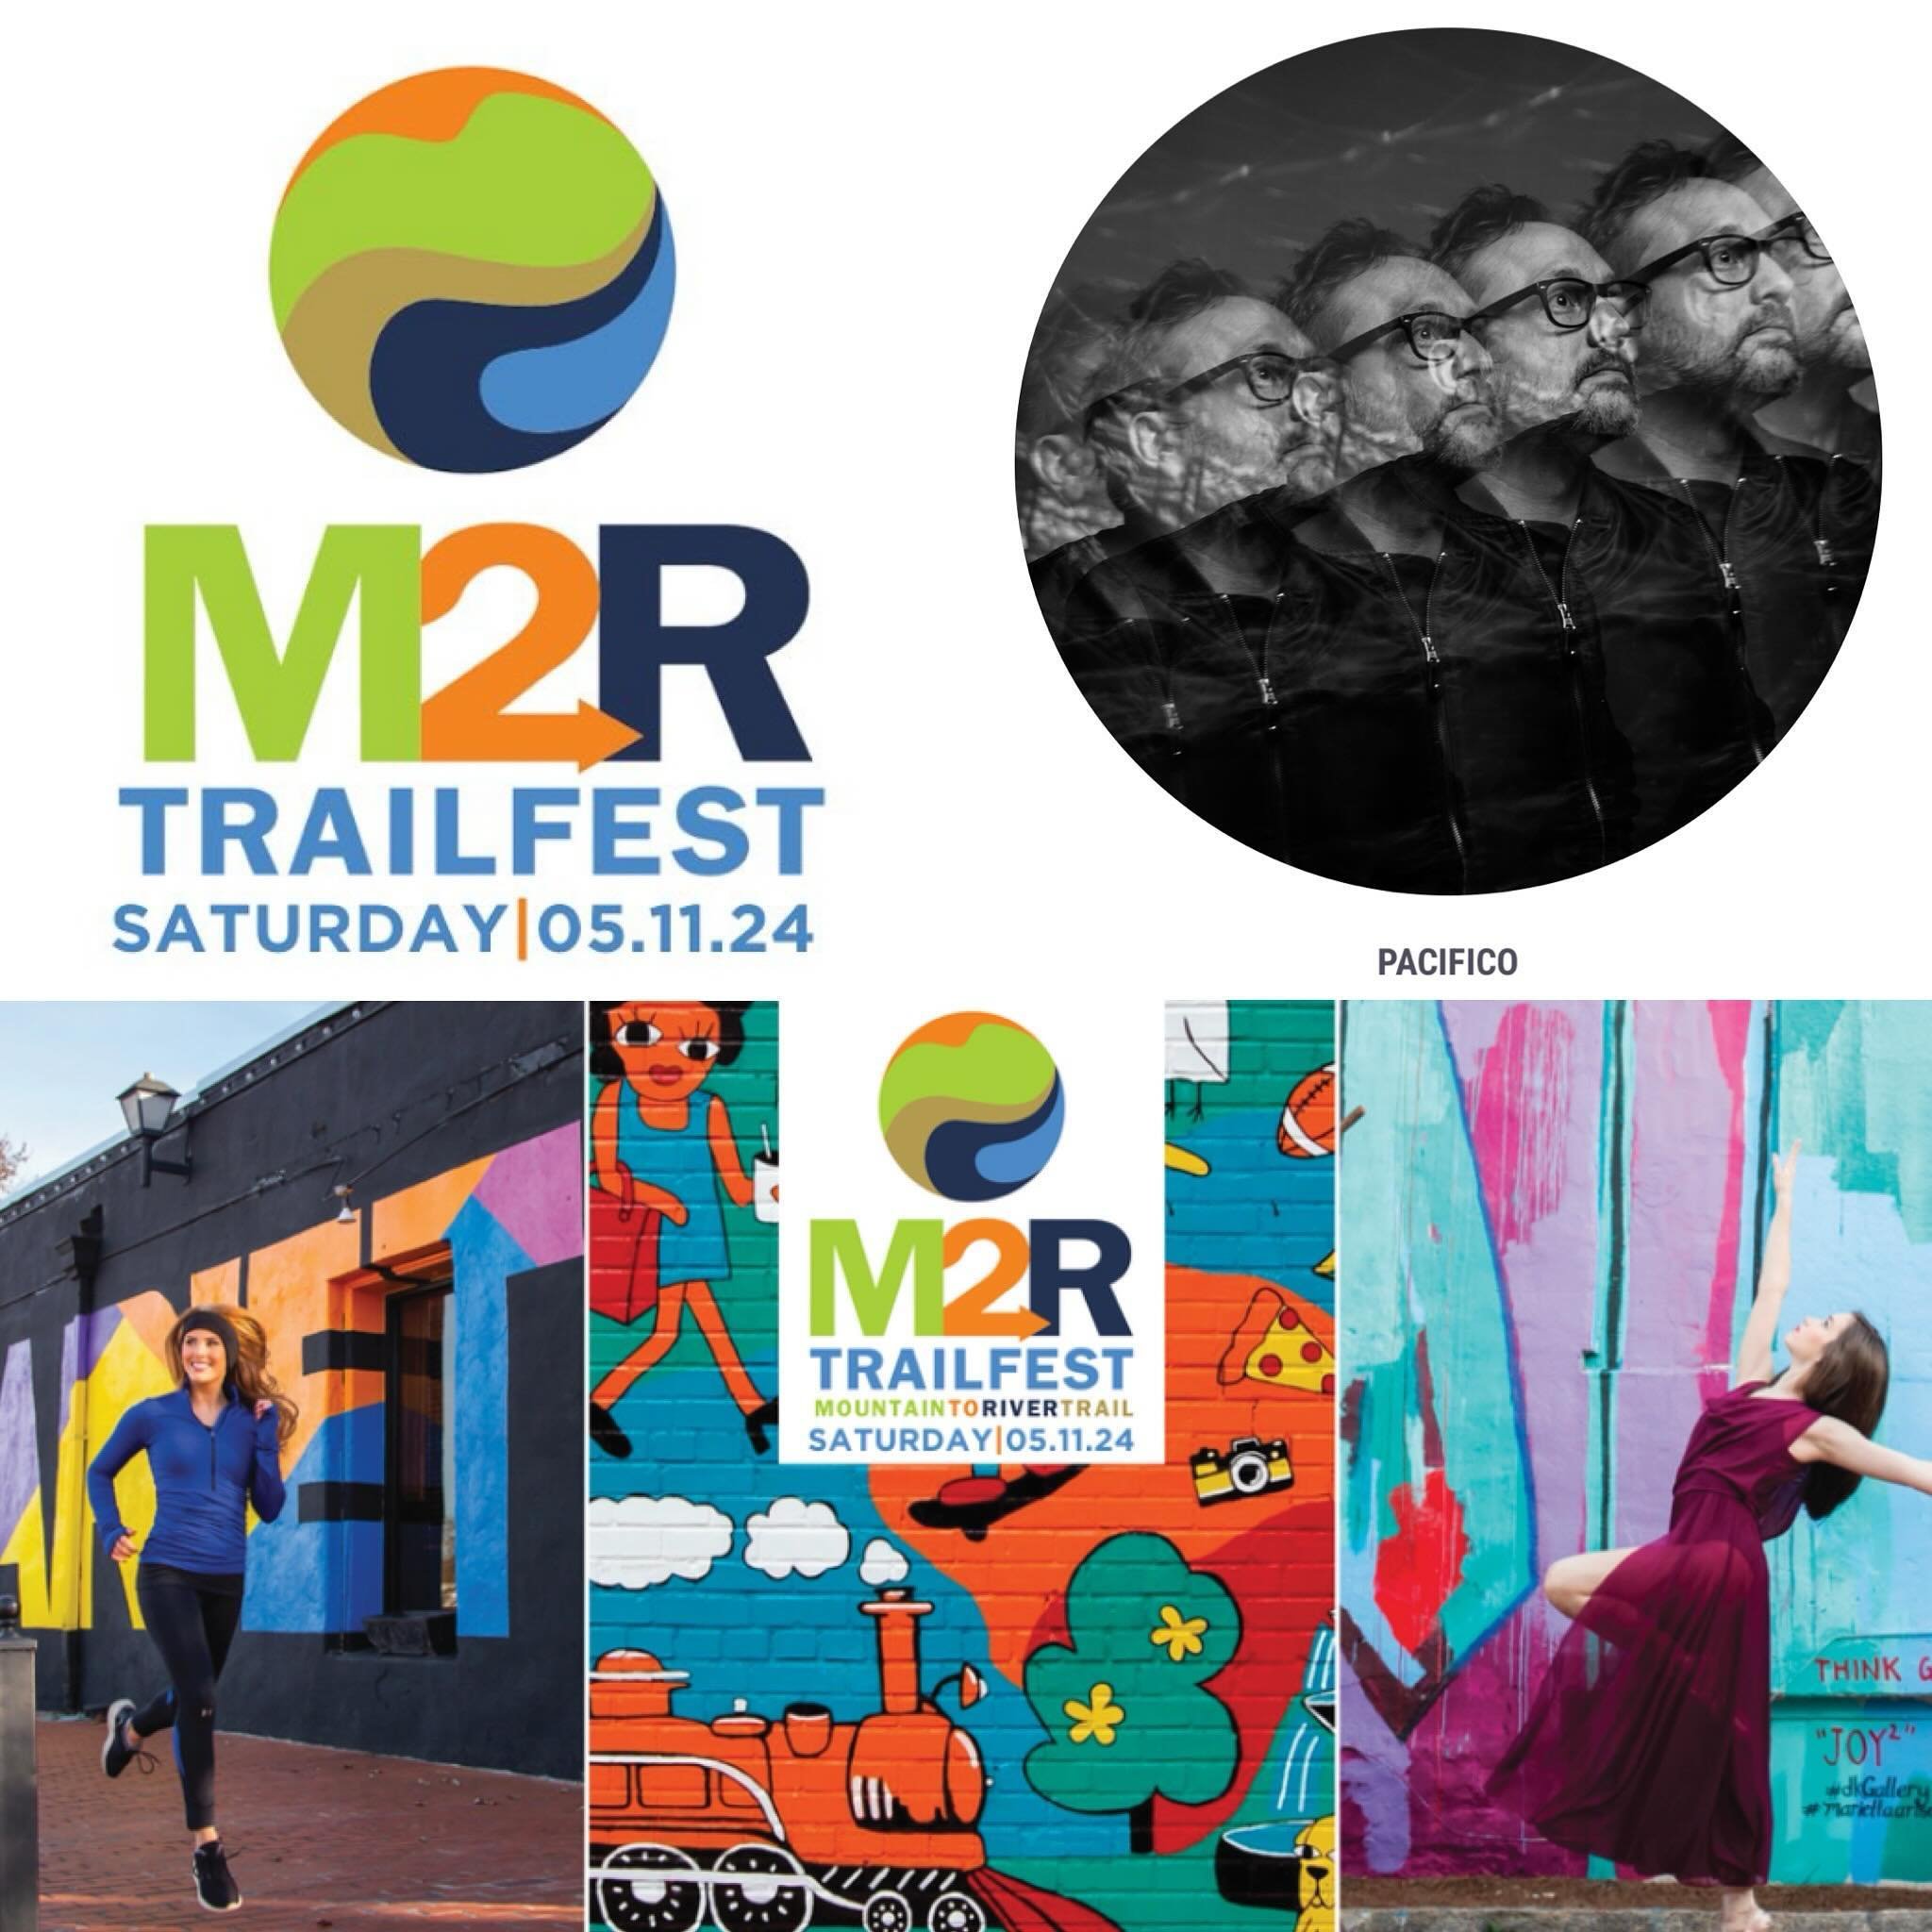 We are excited to announce that Pacifico will be returning to perform as a full band at this years M2R TrailFest
Saturday May 11th in downtown Marietta, GA

We are flattered to be closing out the Festival for the second year in a row! - We will be pe